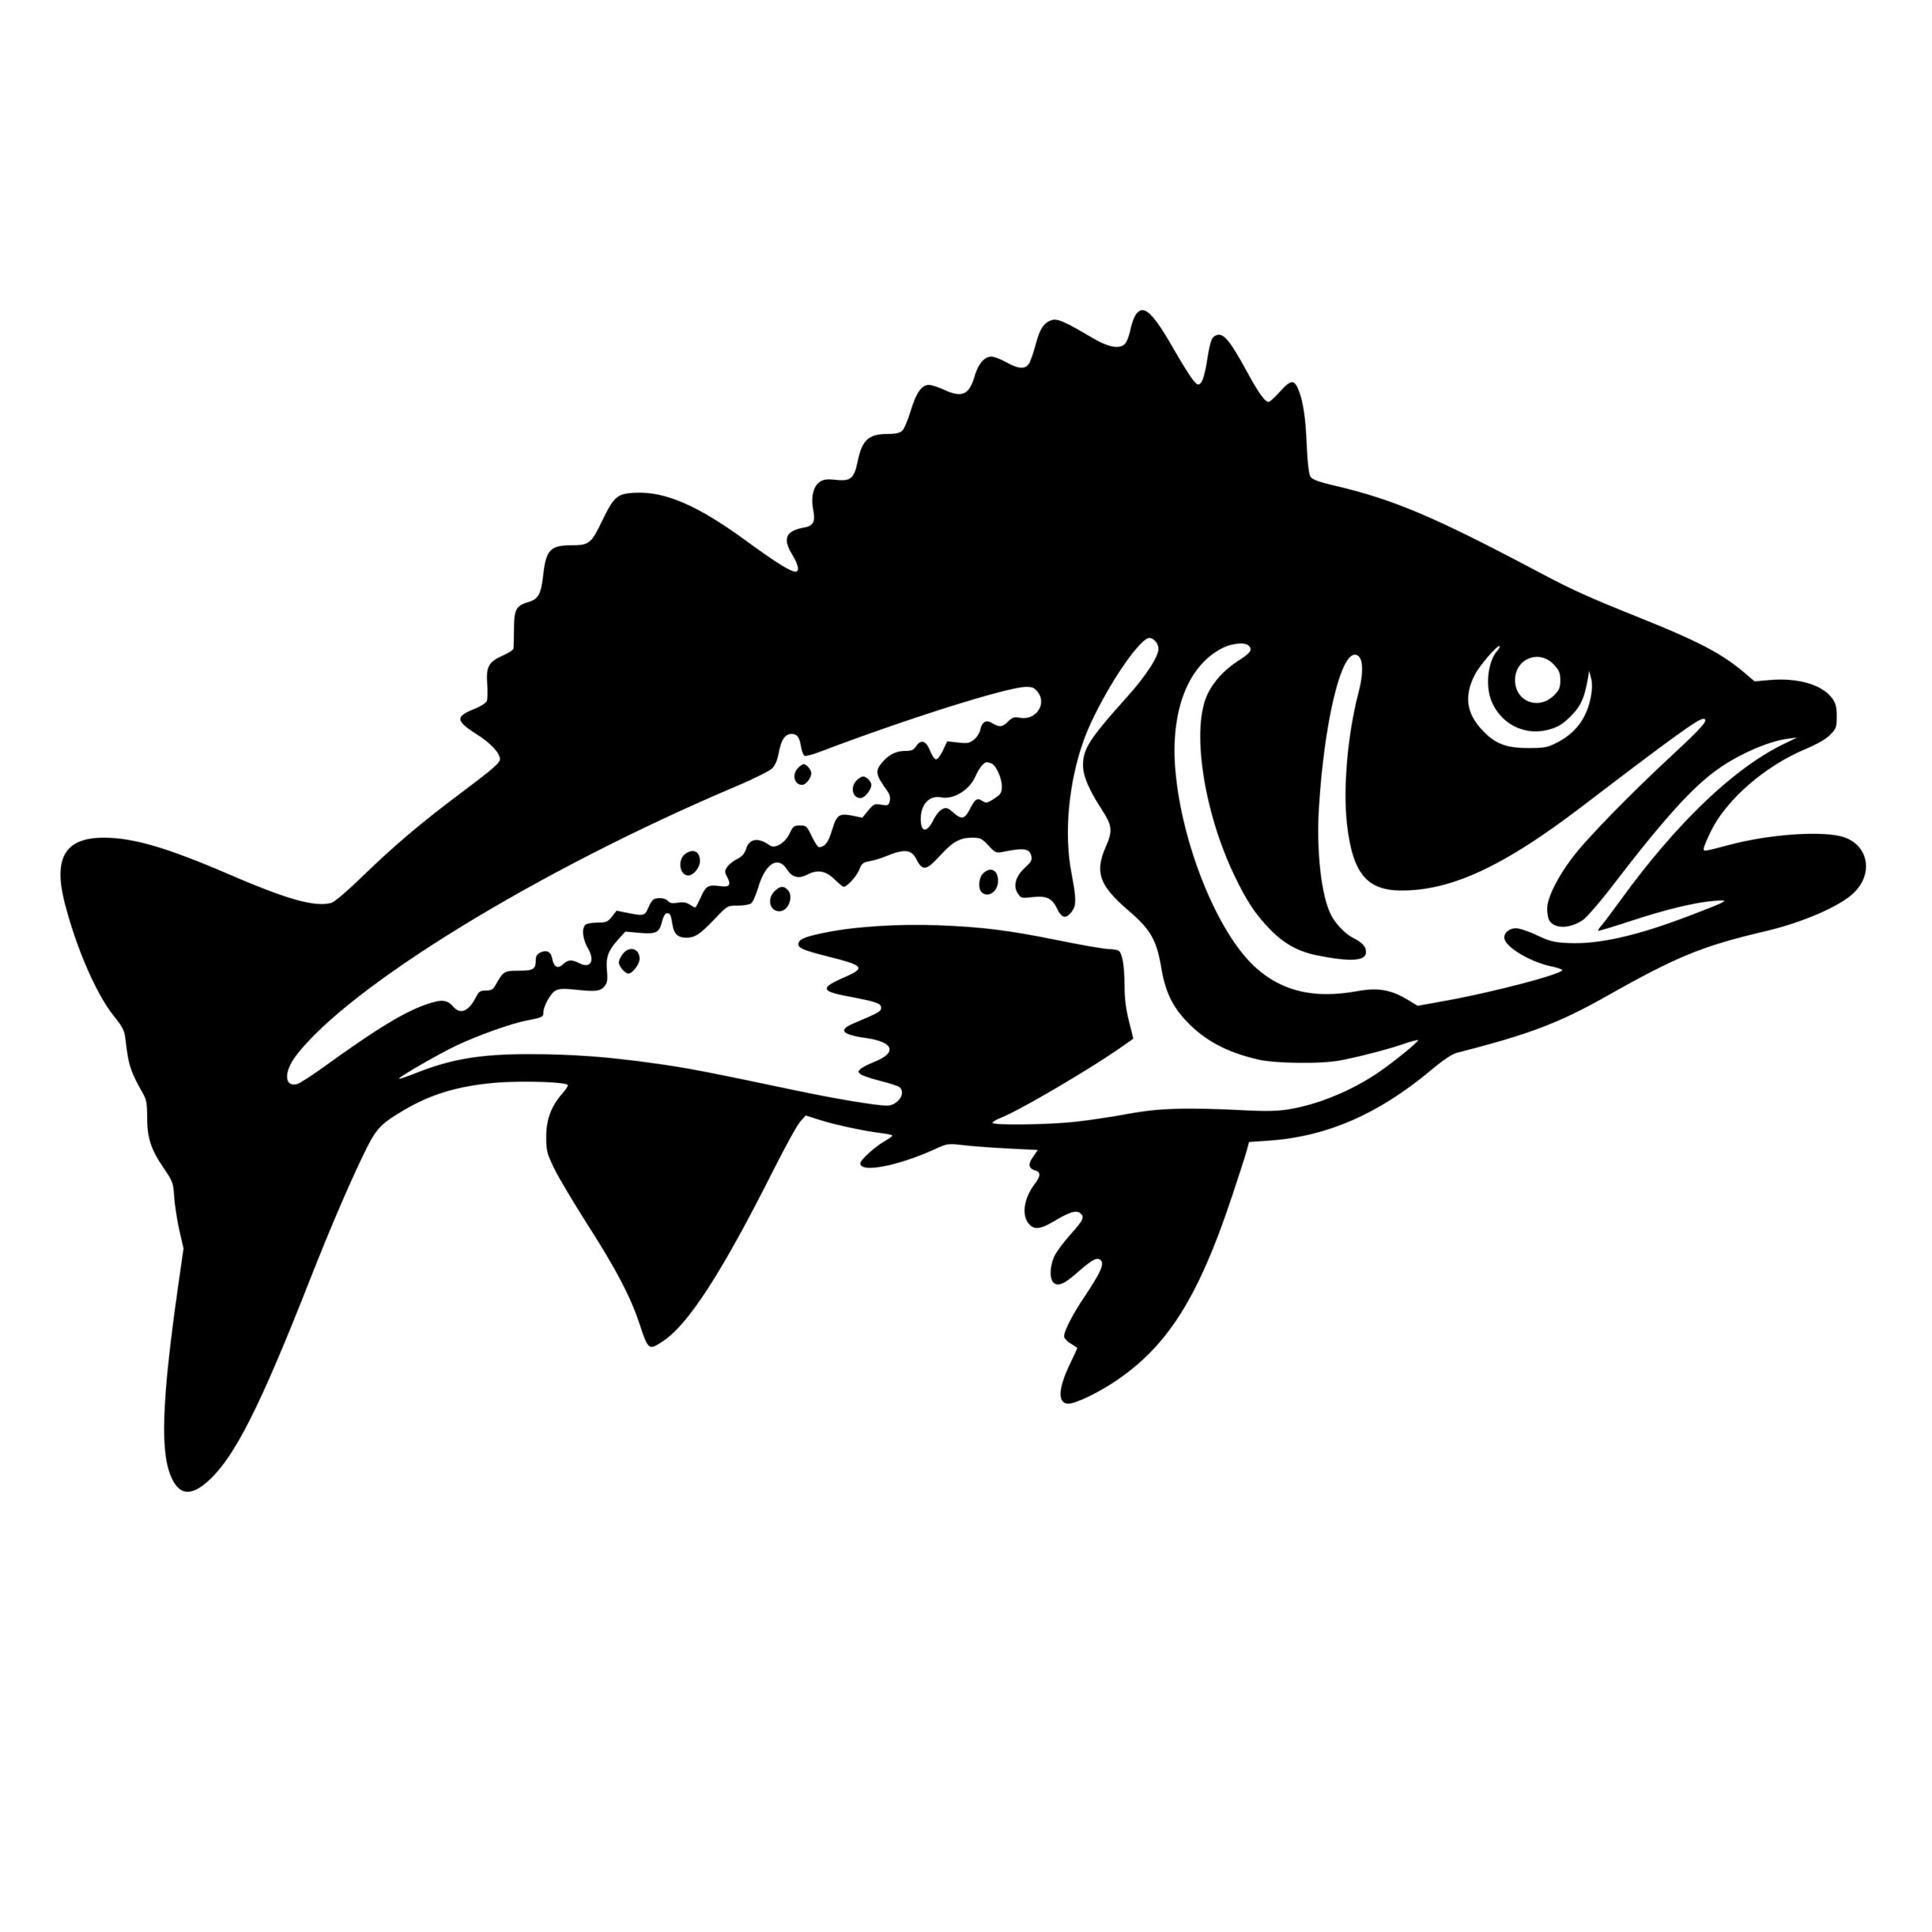 Instant Download: Walleye Fish SVG for Cricut, Silhouette, and